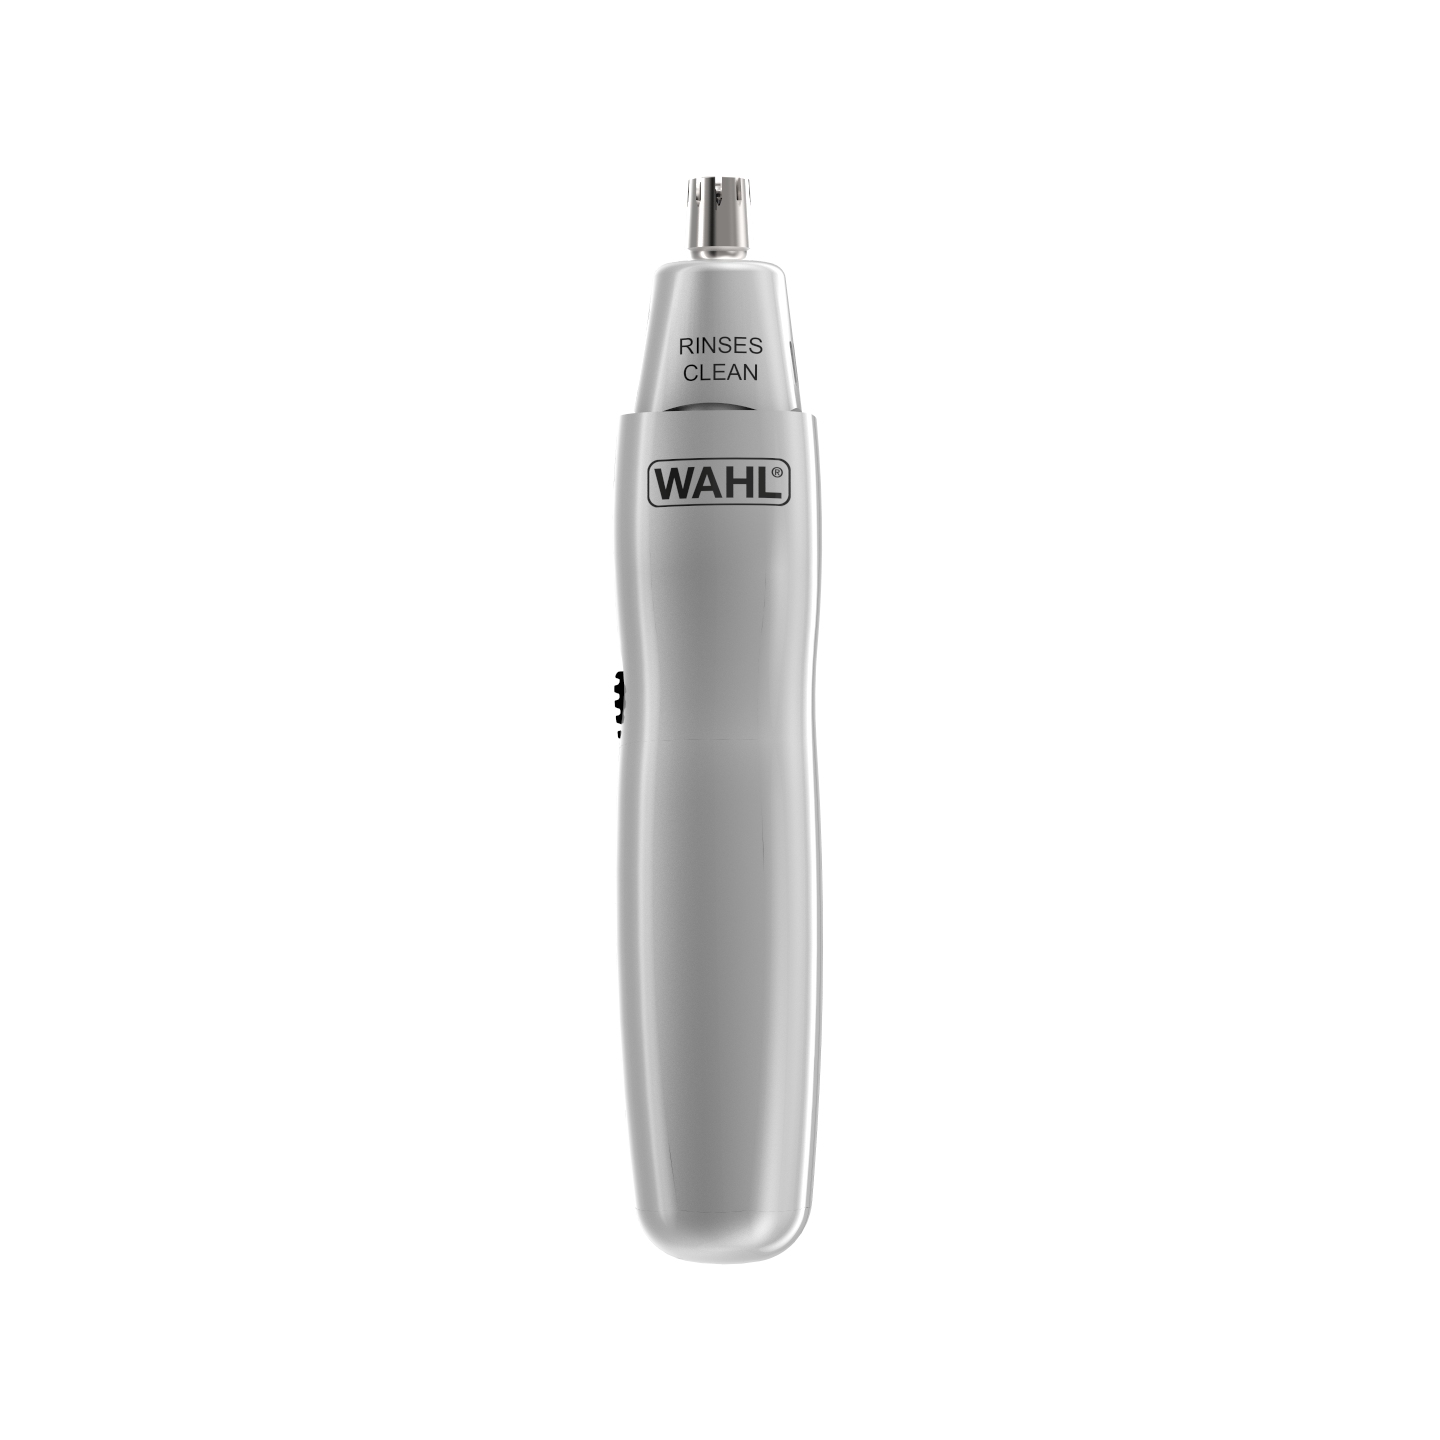 wahl 3 in 1 hair clippers